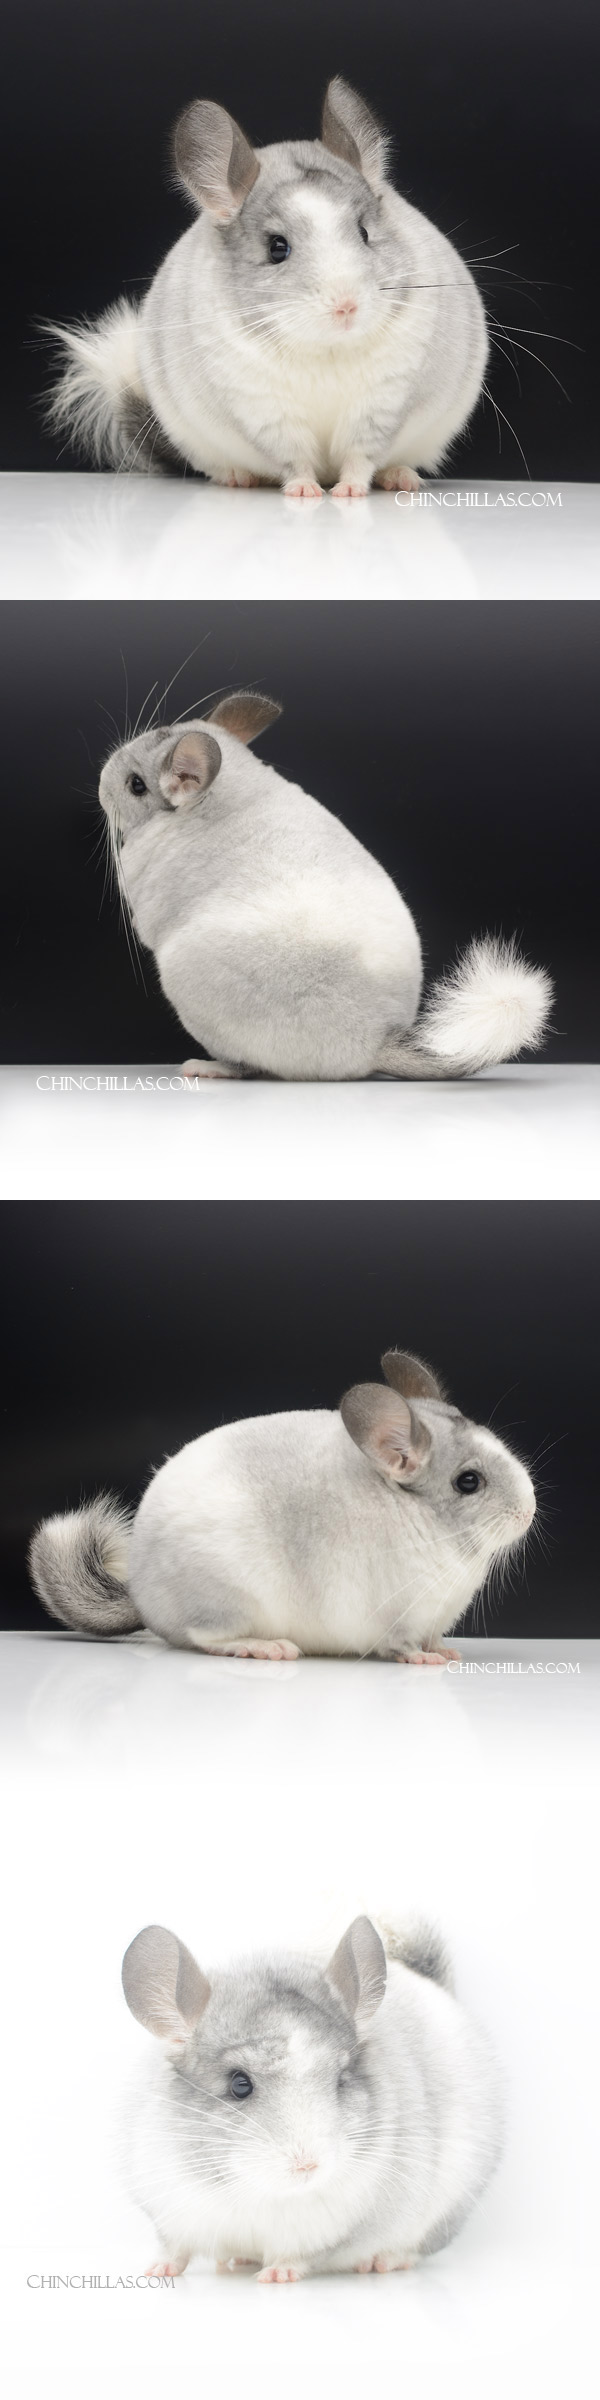 Chinchilla or related item offered for sale or export on Chinchillas.com - 23106 Show Quality White Mosaic Female Chinchilla